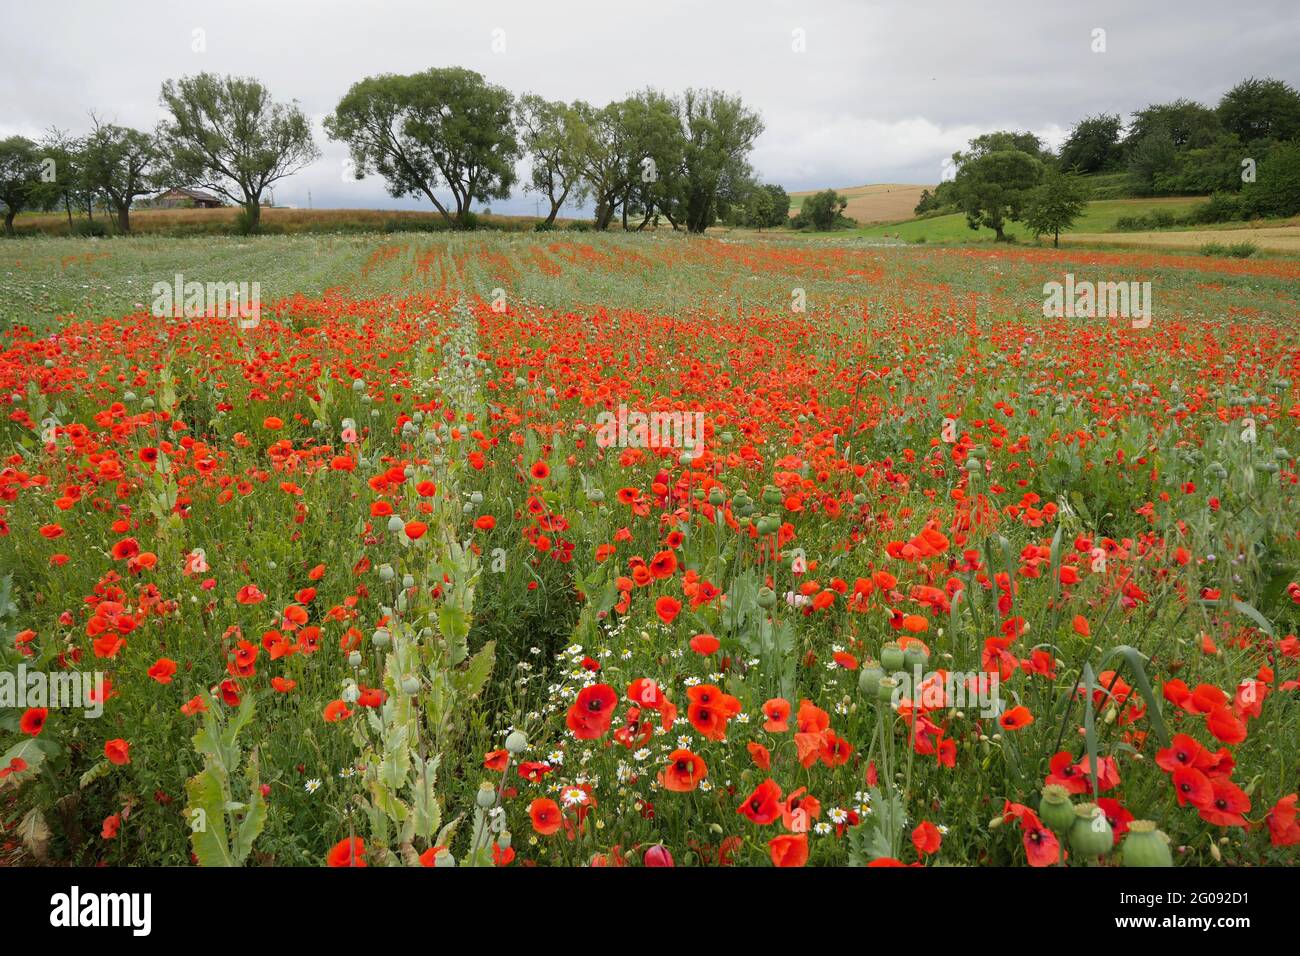 Flower fields of poppies, wild flowers and sunflowers Stock Photo